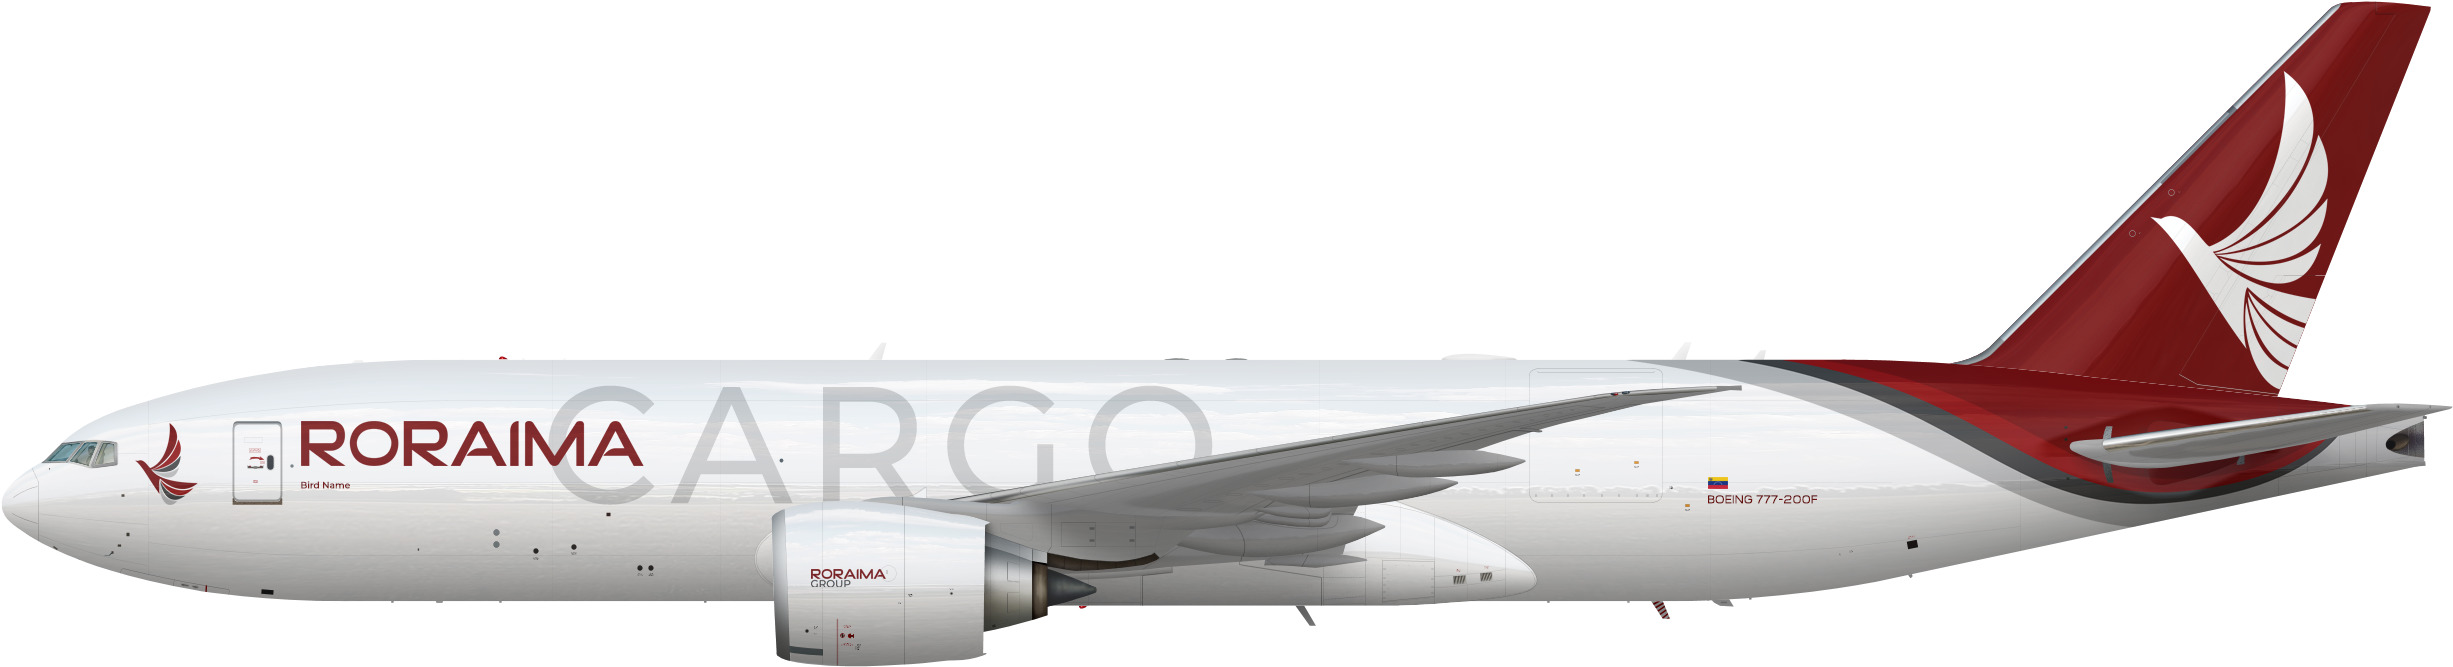 Boeing 777-200f - Roraima Virtual Airline (2502x759), Png Download